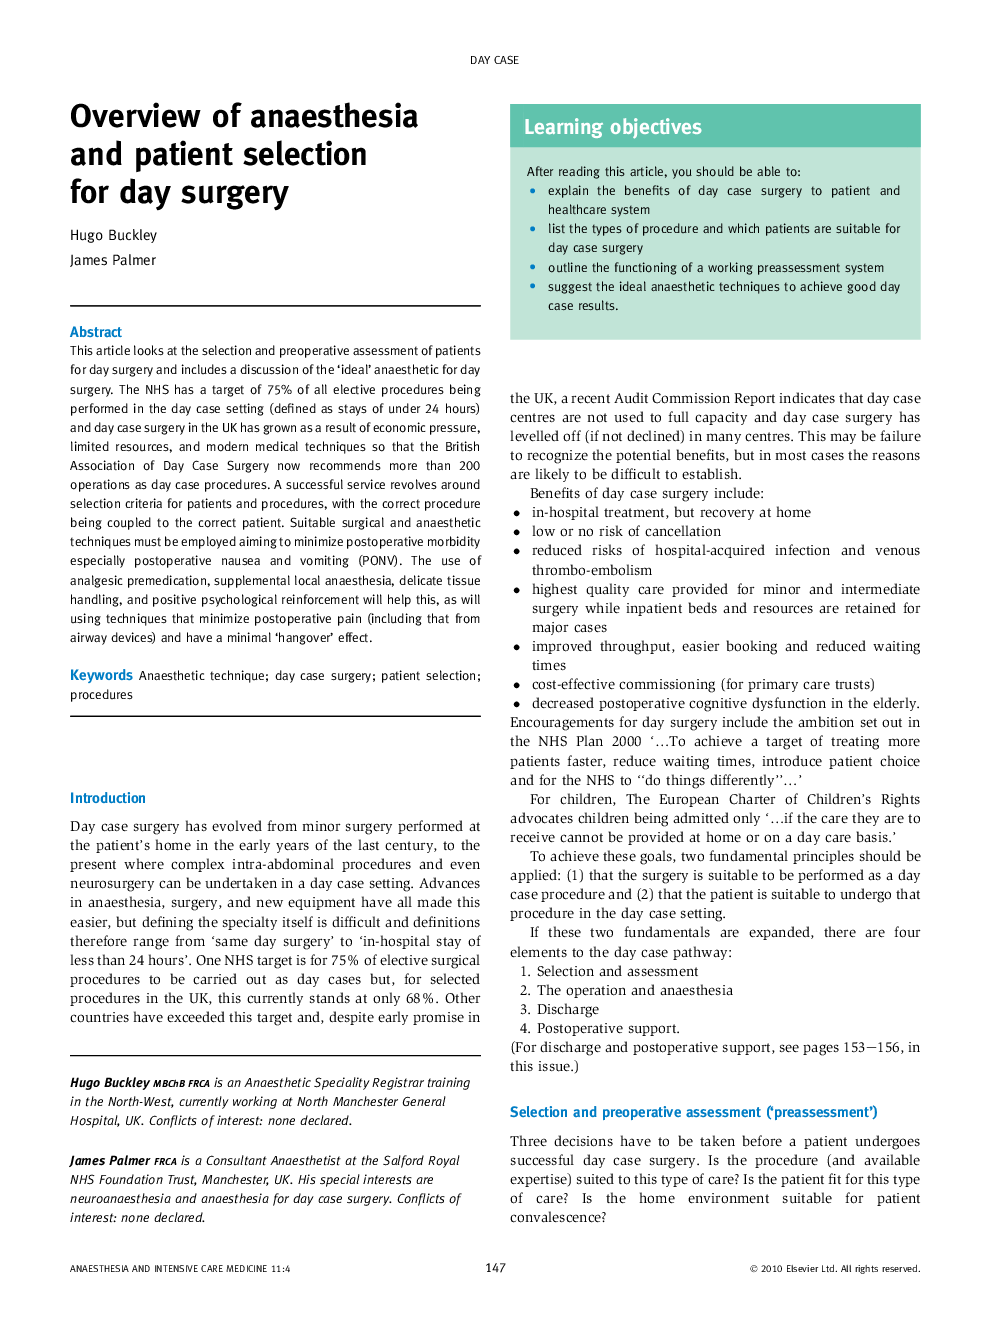 Overview of anaesthesia and patient selection for day surgery